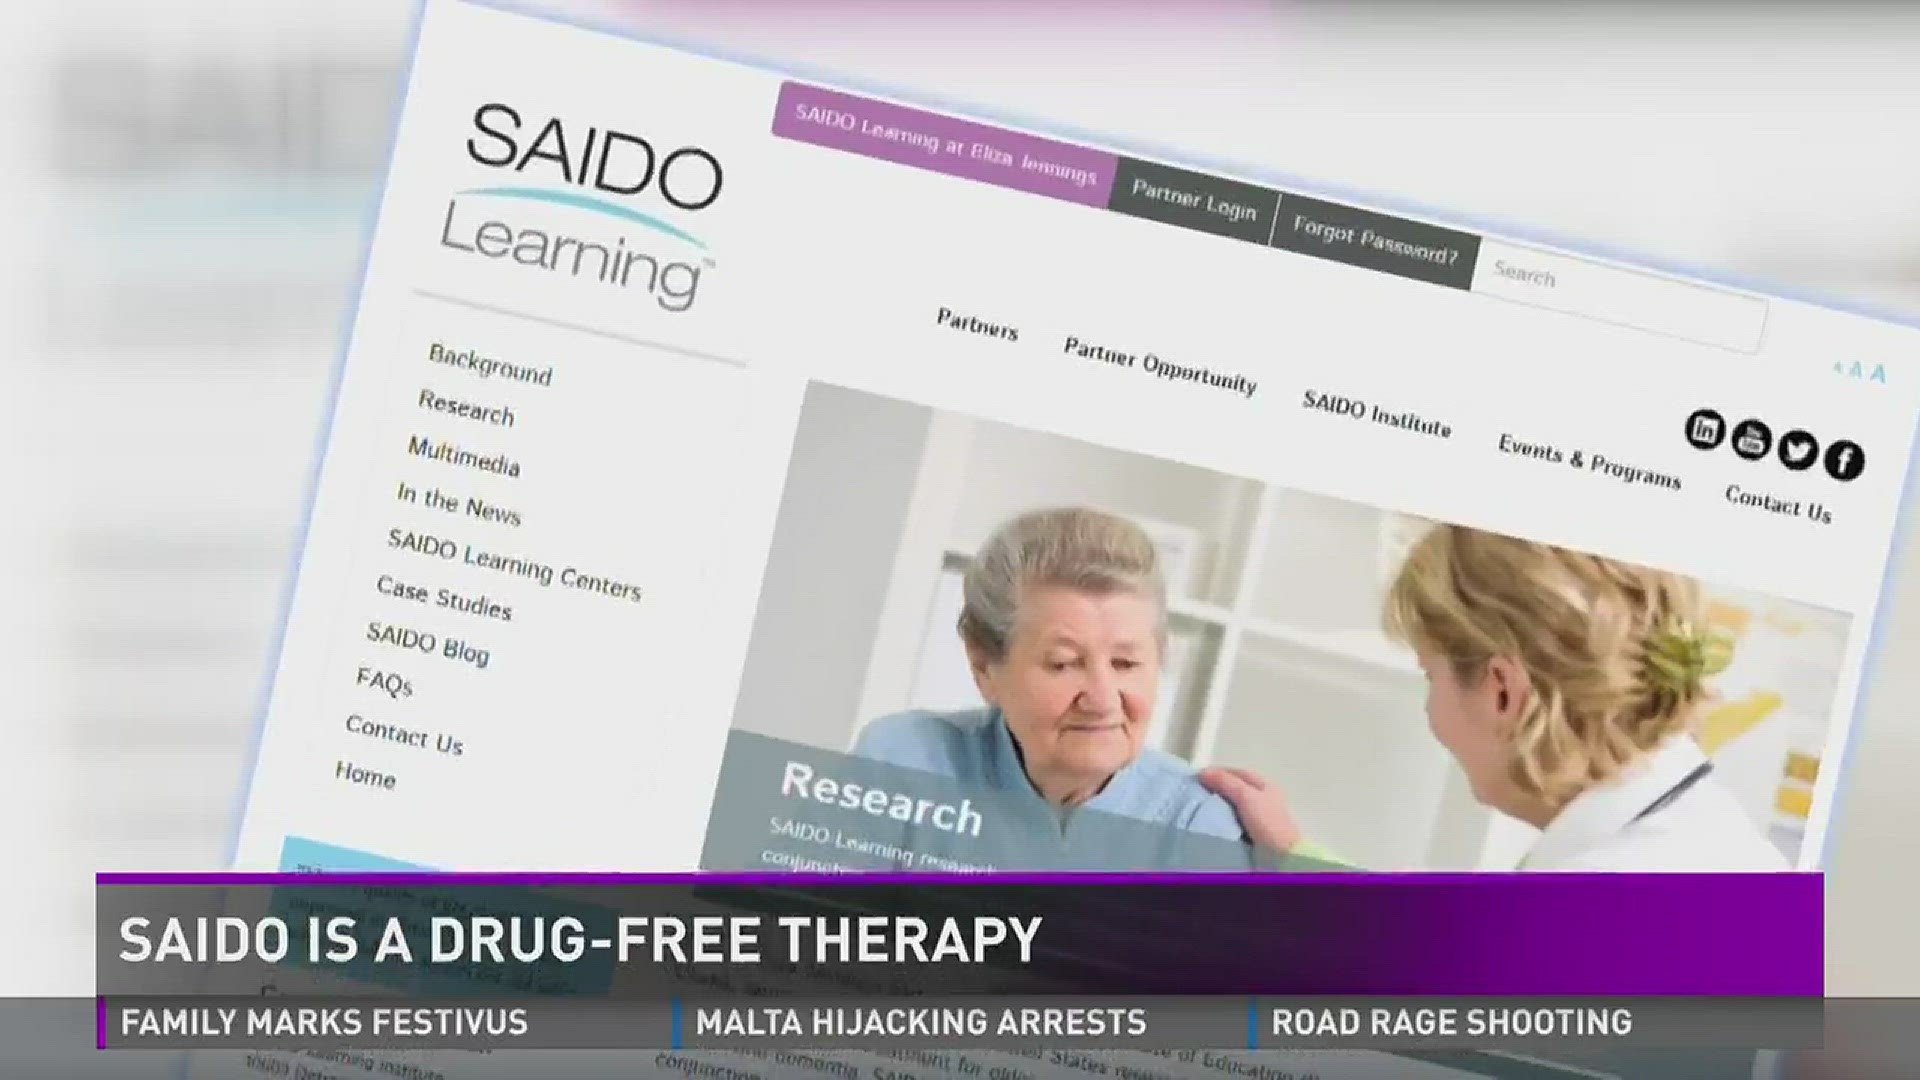 Saido is a drug-free therapy